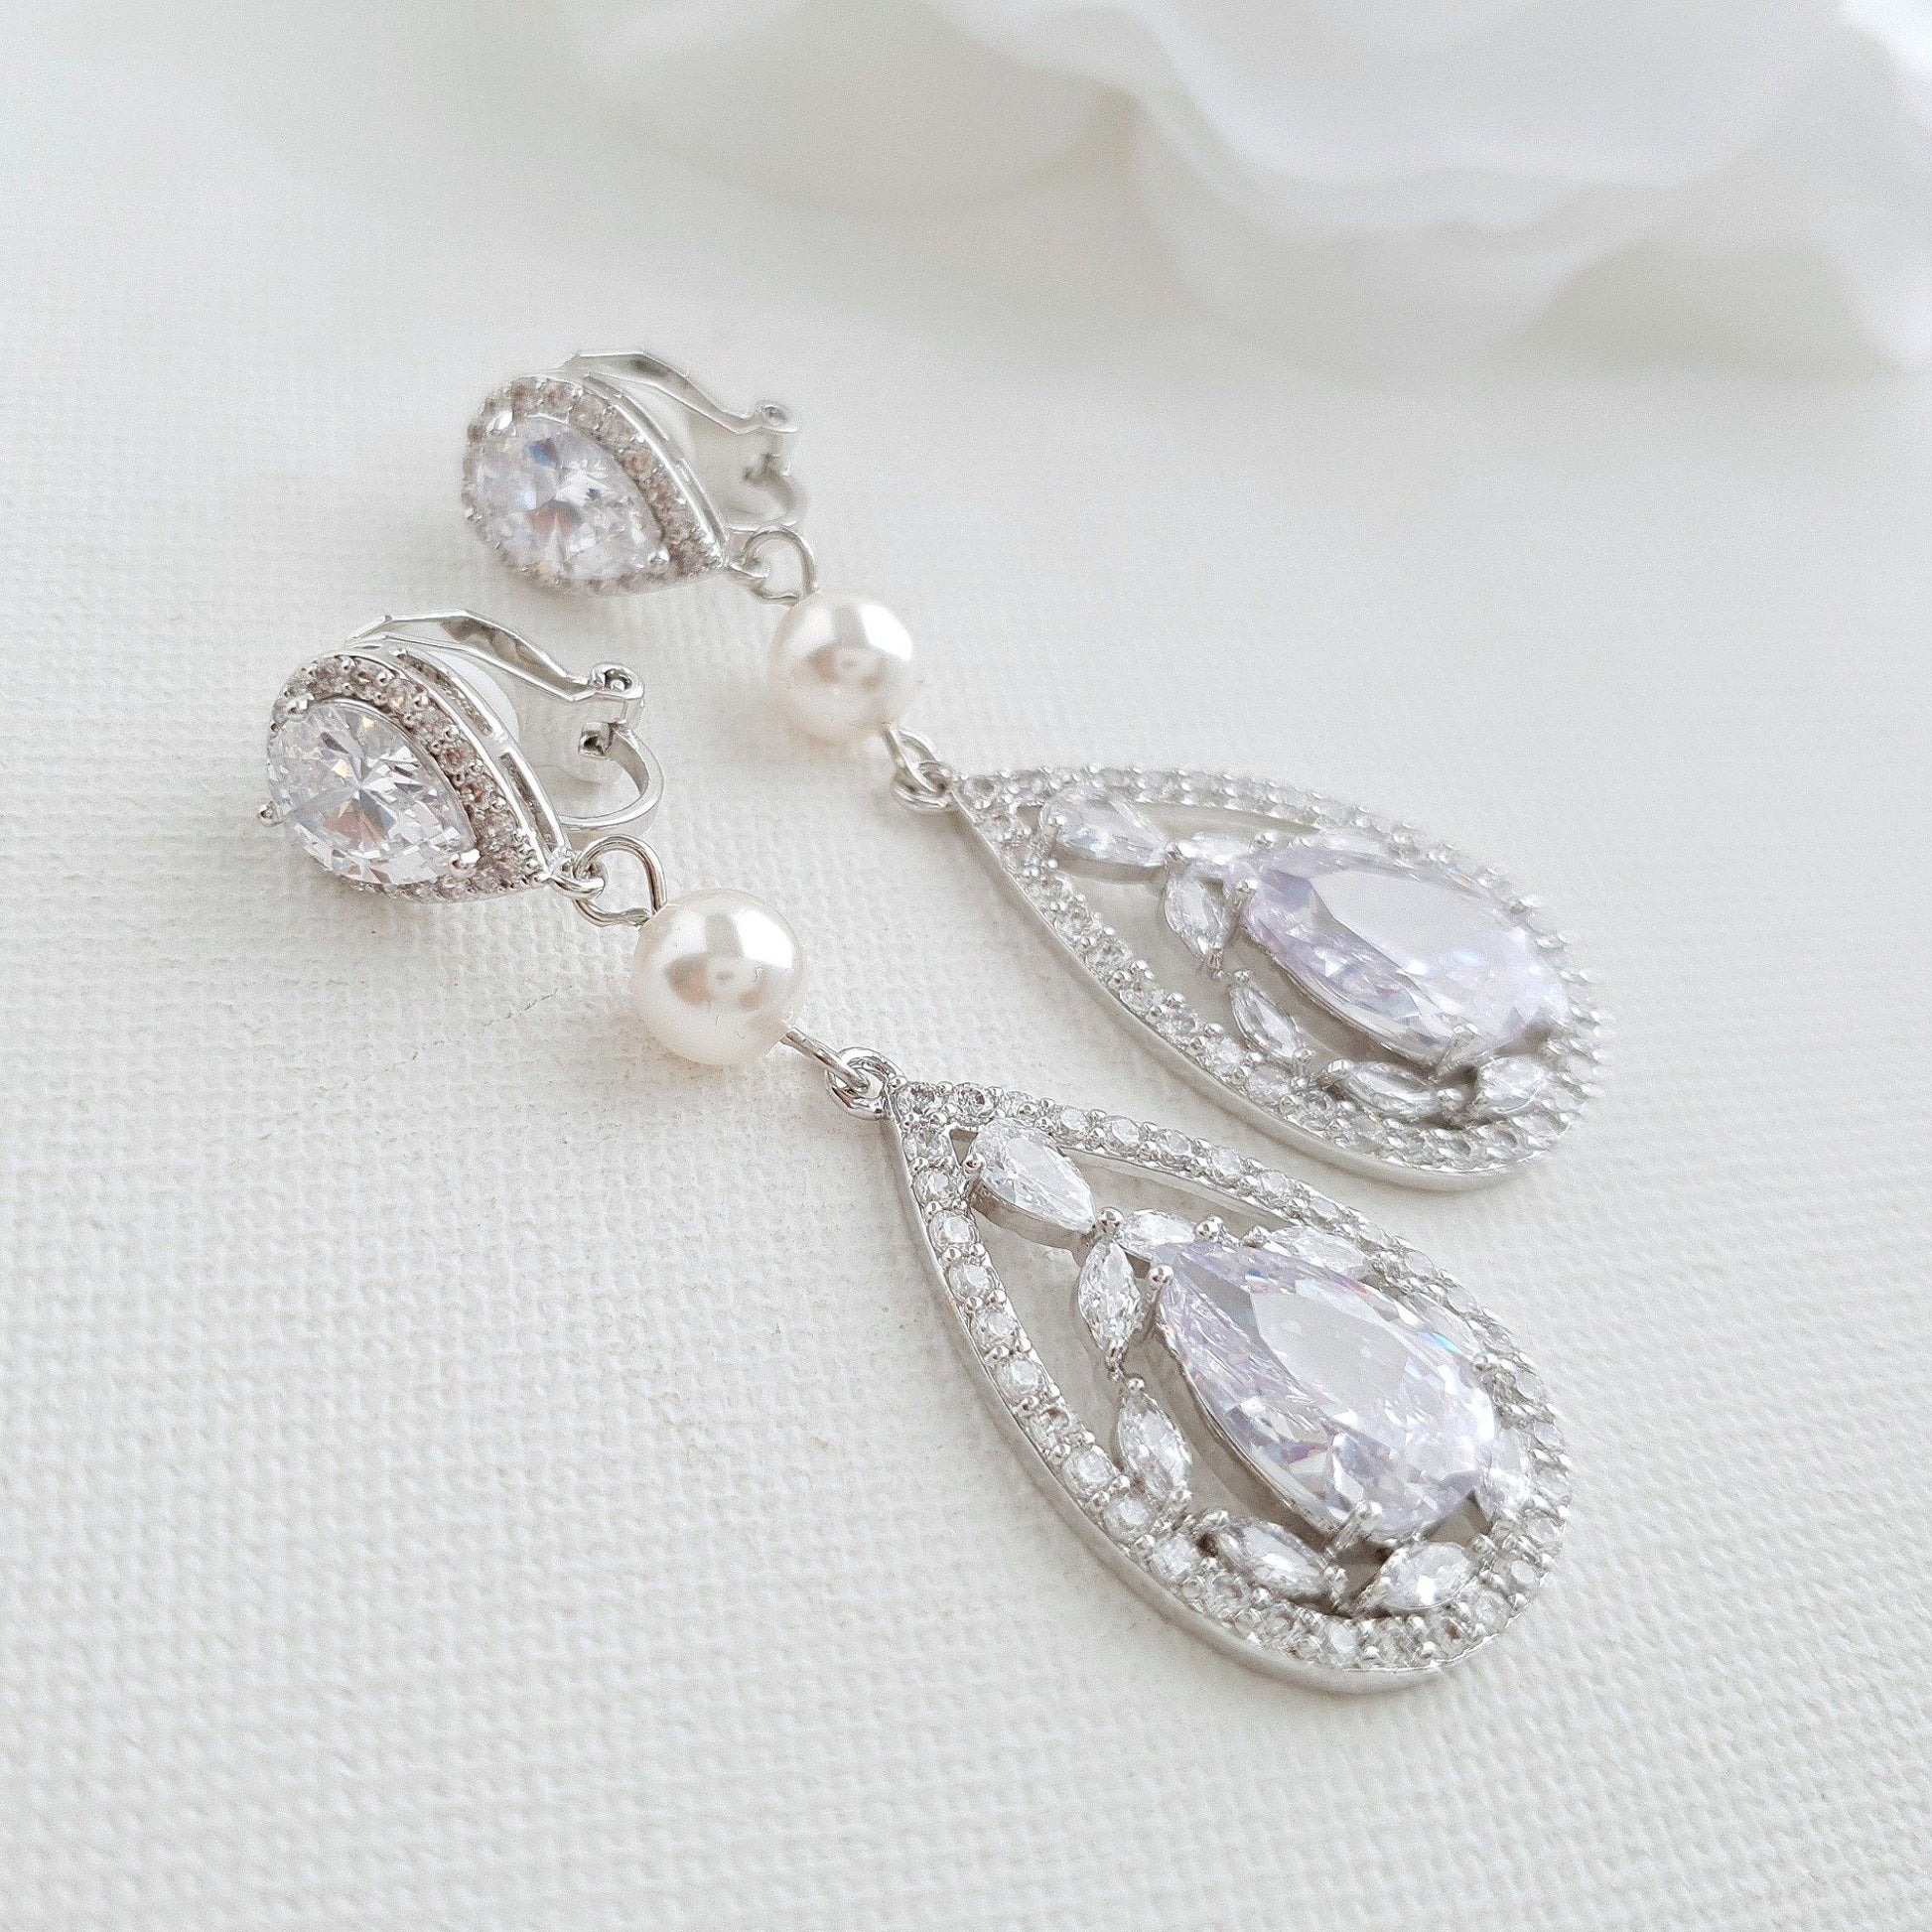 Silver Clip Earrings in Cubic Zirconia for Bridal and Wedding wear- Poetry Designs